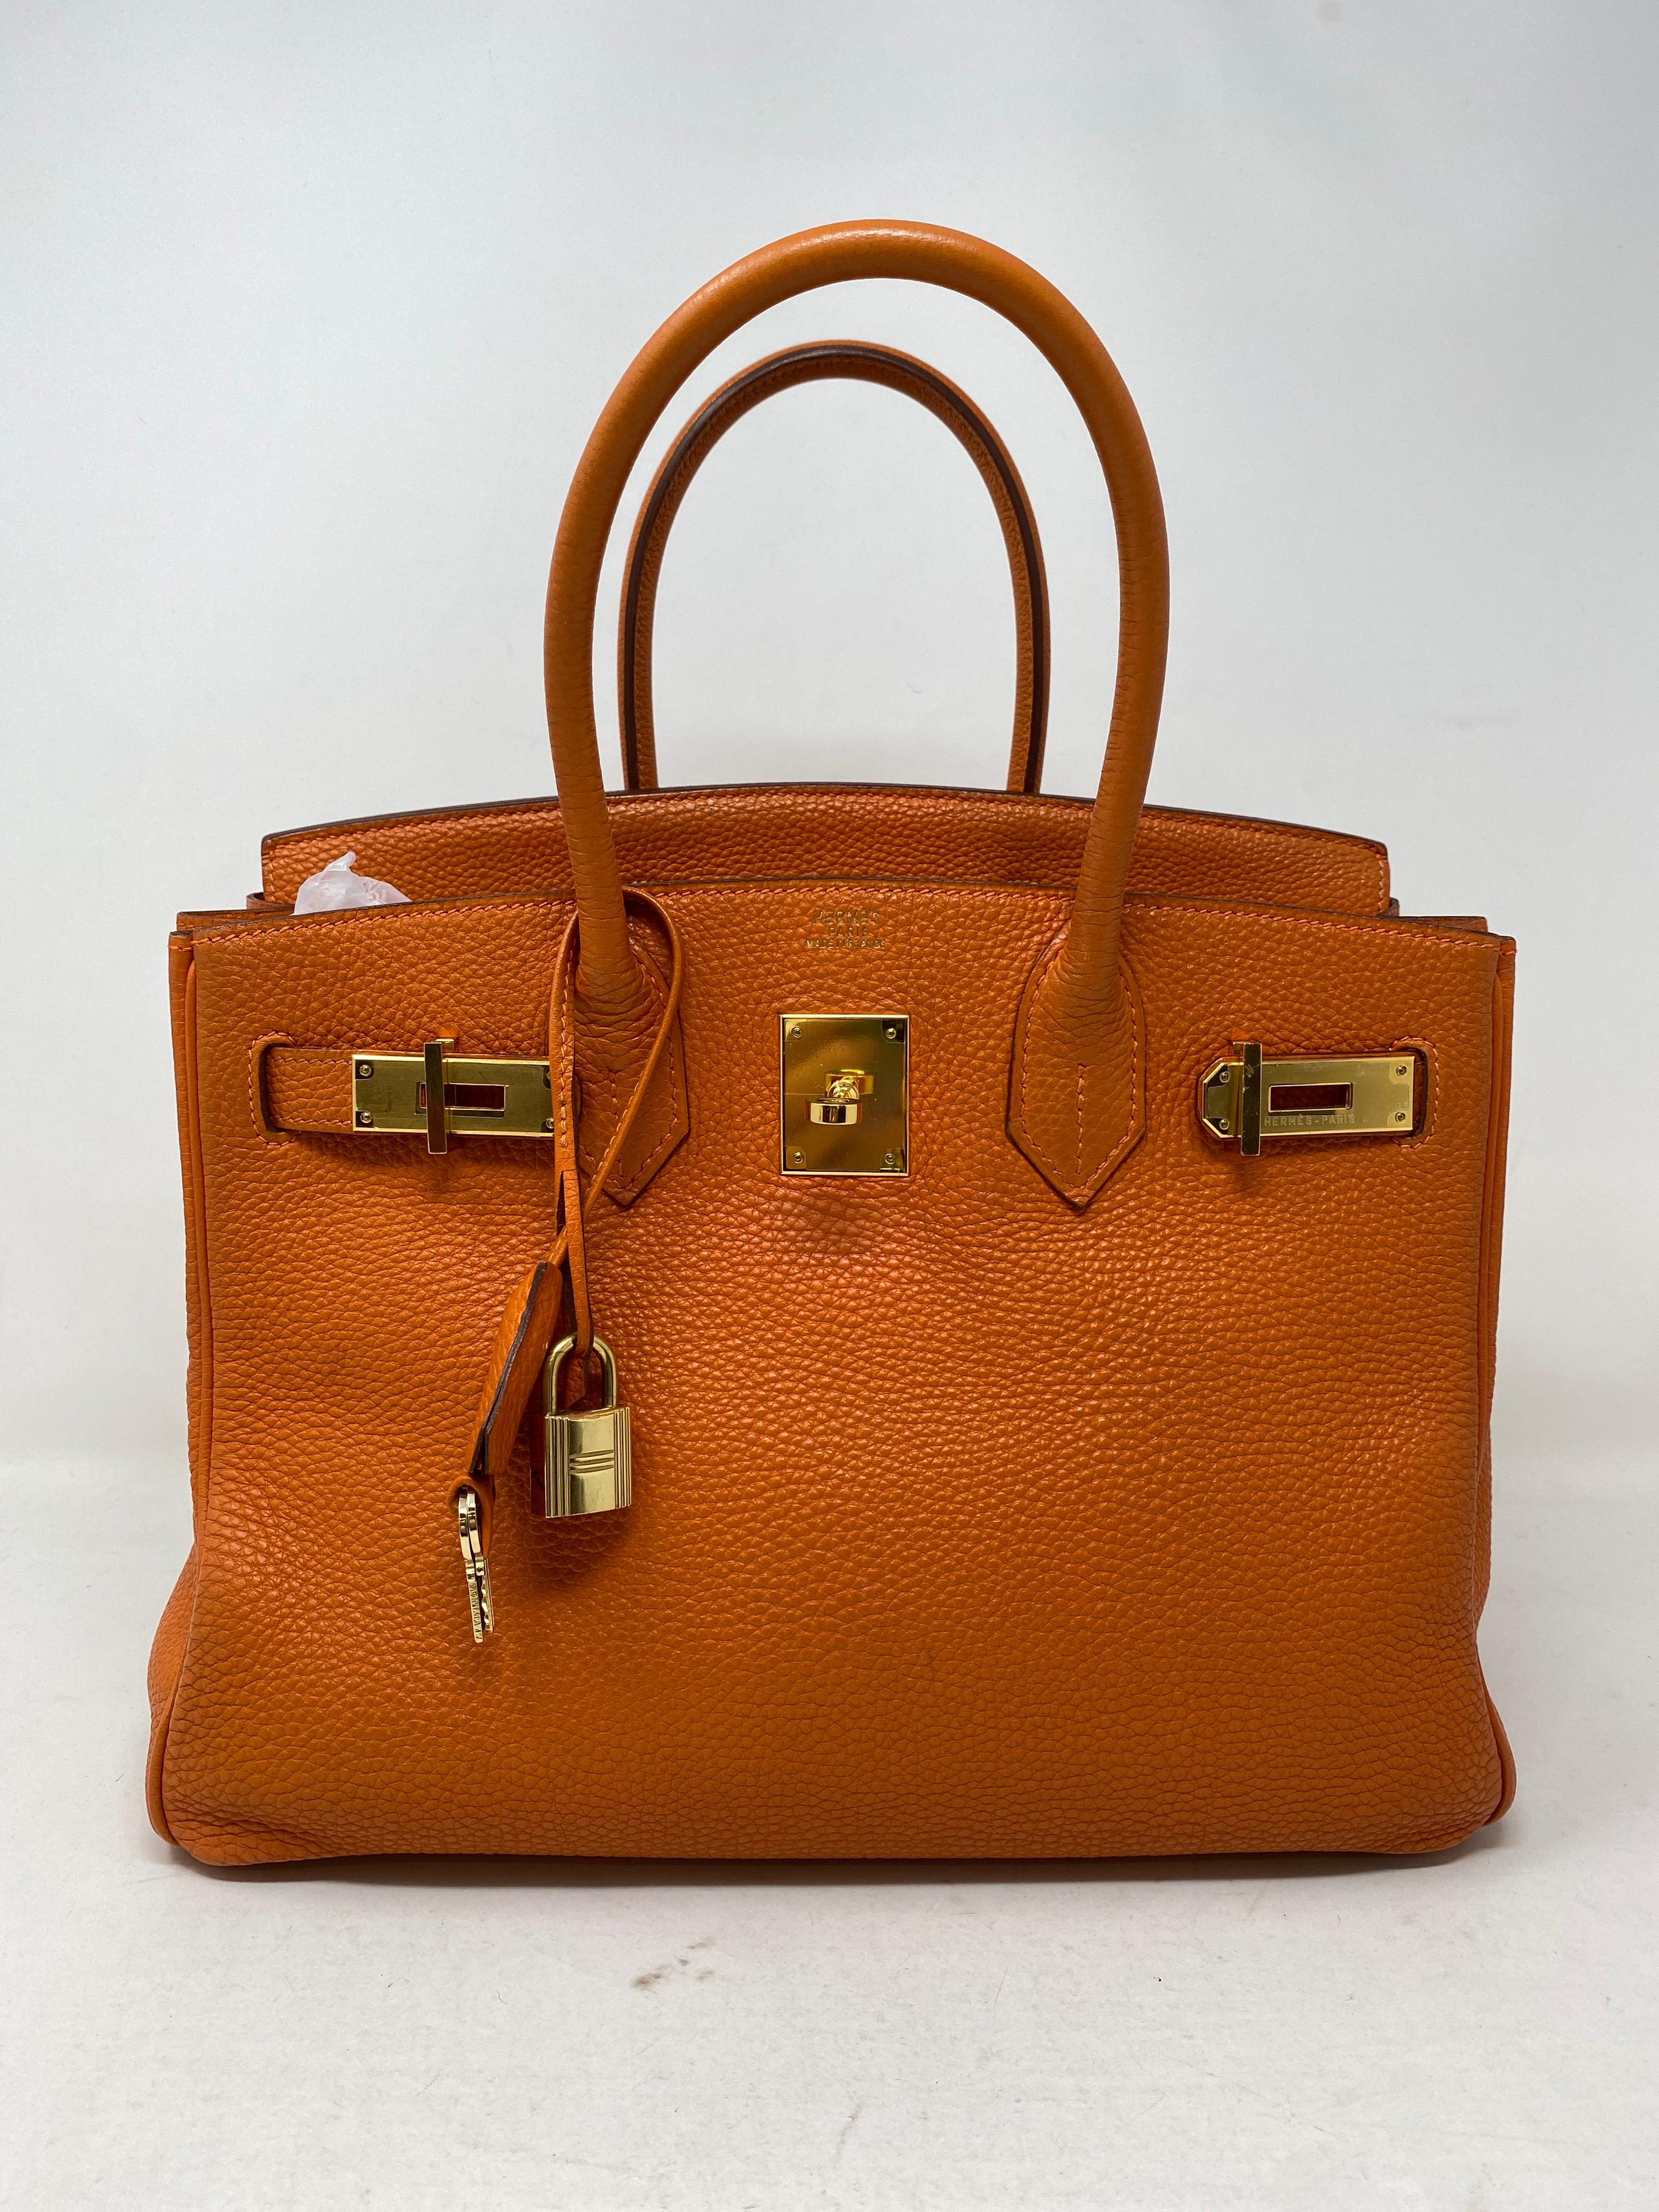 Hermes Birkin 30 Orange Bag. Togo leather. Gold hardware. Most wanted color combo and hard size to find 30. Good condition. Includes clochette, lock, keys, and dust cover. Guaranteed authentic. 